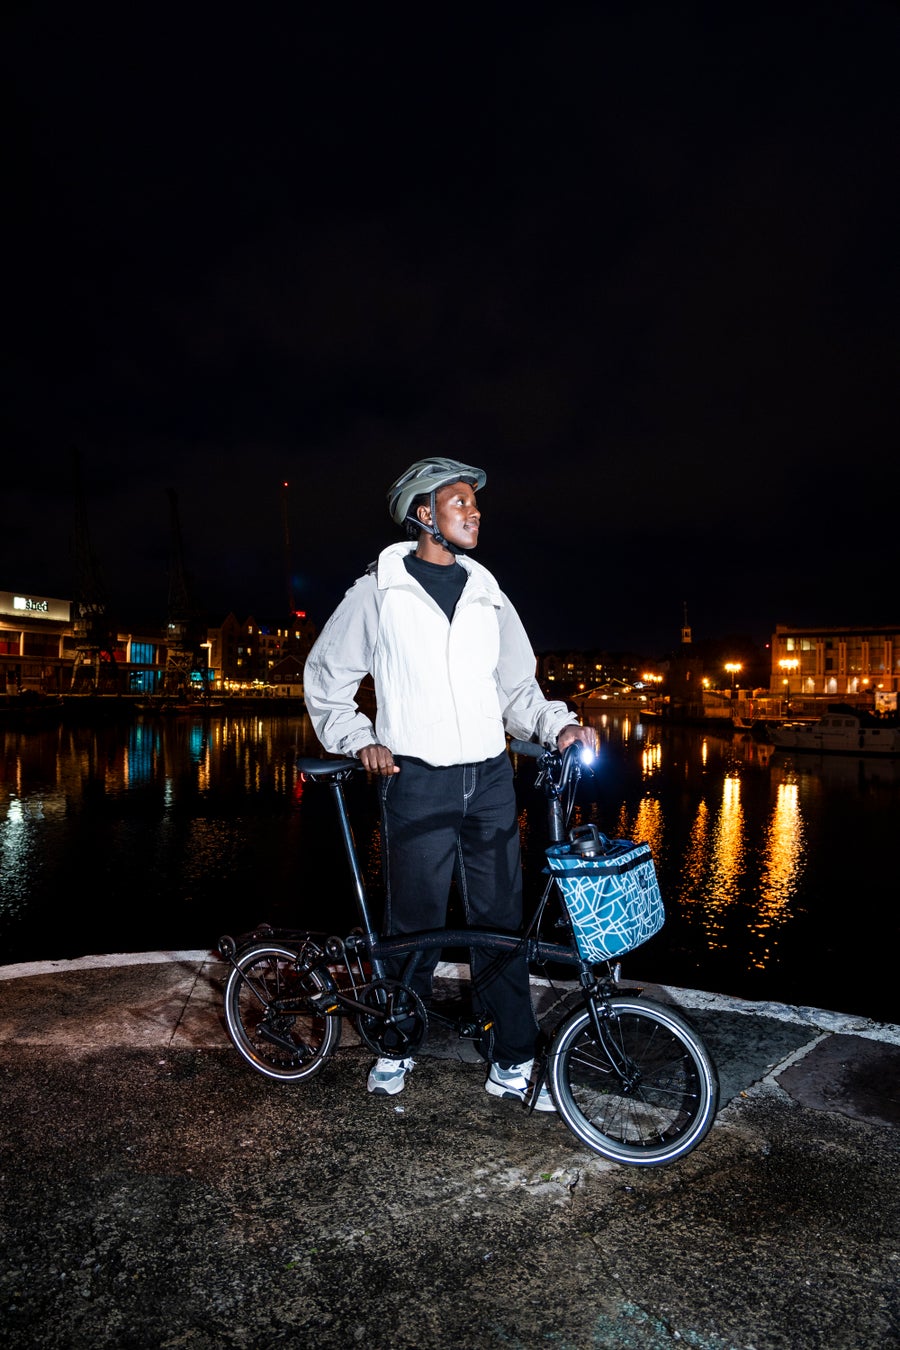 A happy cyclist on a Brompton folding bike with the Bright Nights luggage collection